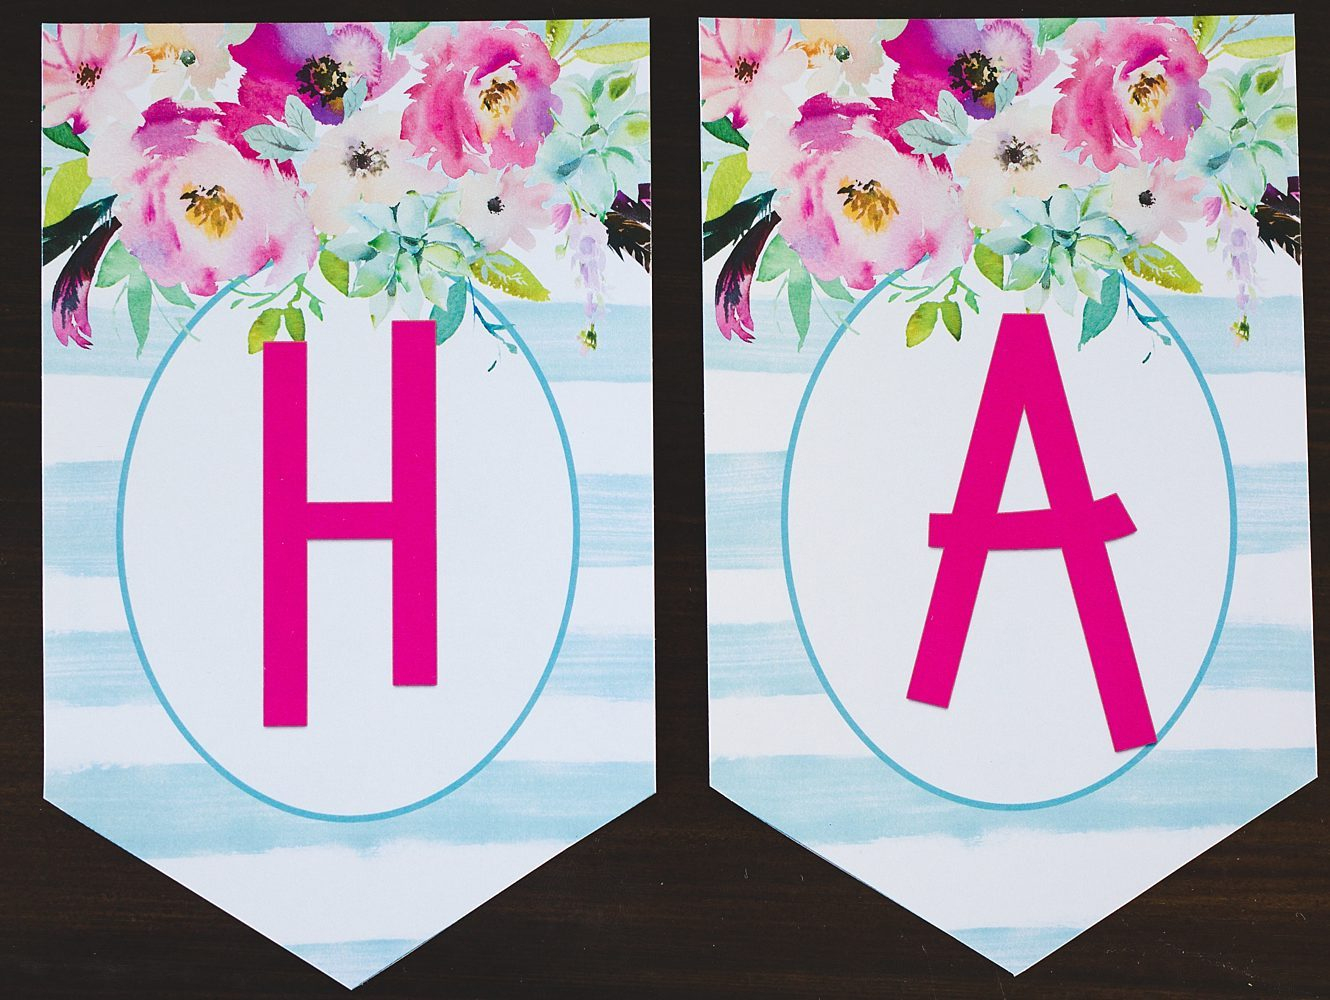 Free Printable Birthday Banner - Six Clever Sisters - Free Printable Birthday Banner